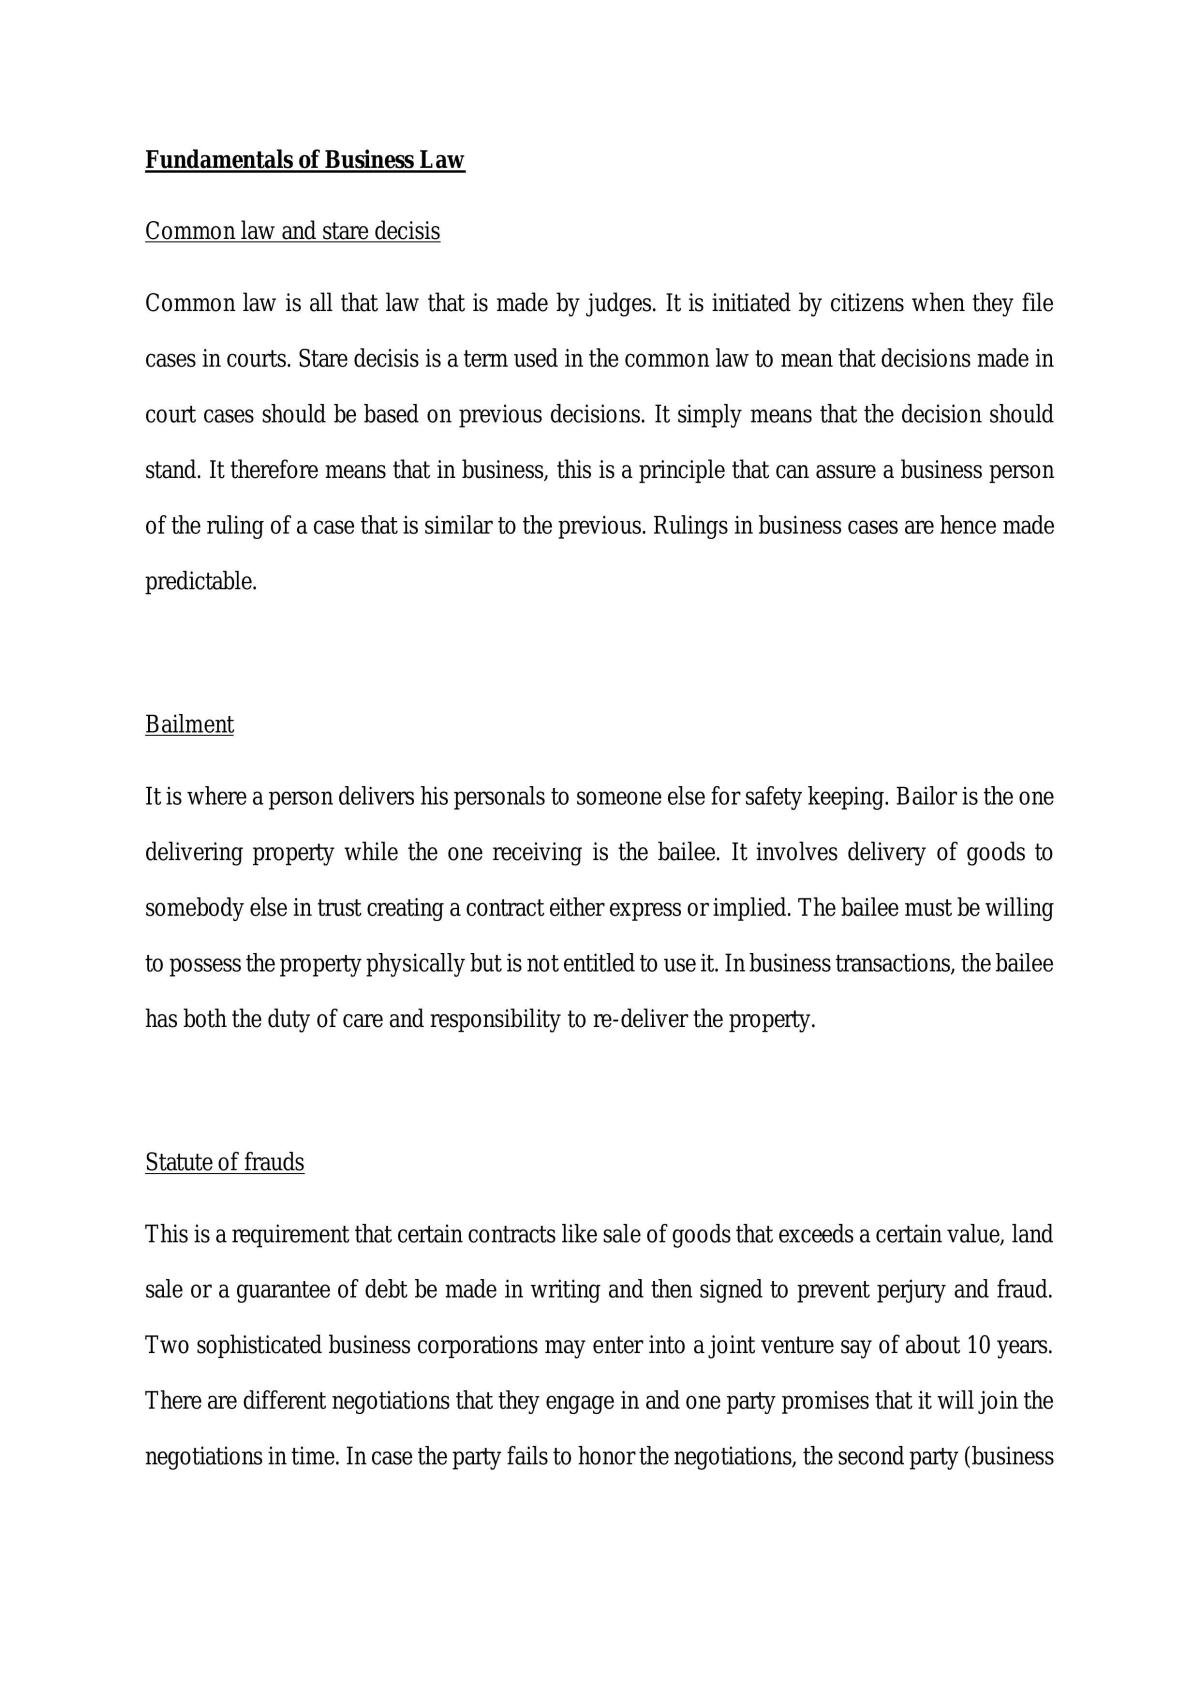 Fundamentals of Business Law Essay - Page 1